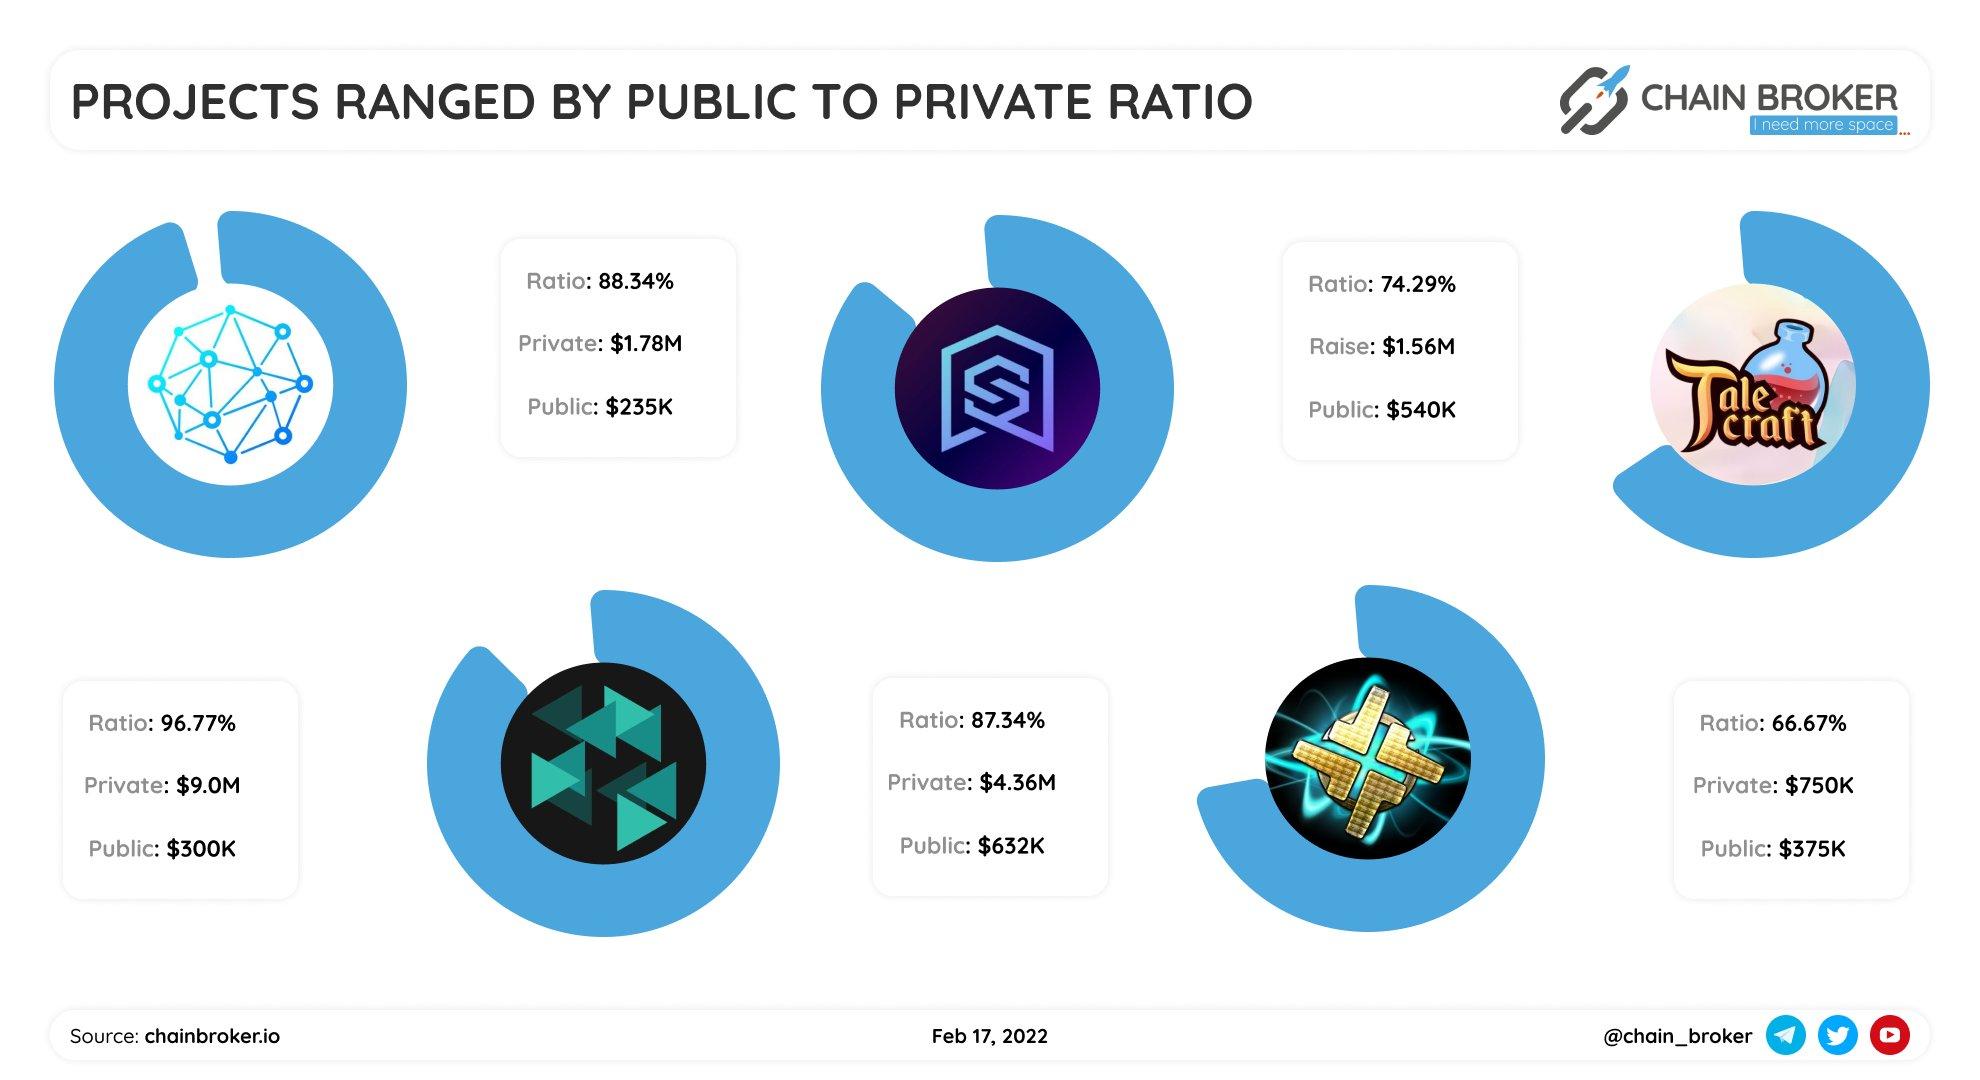 Top projects ranged by public to private ratio